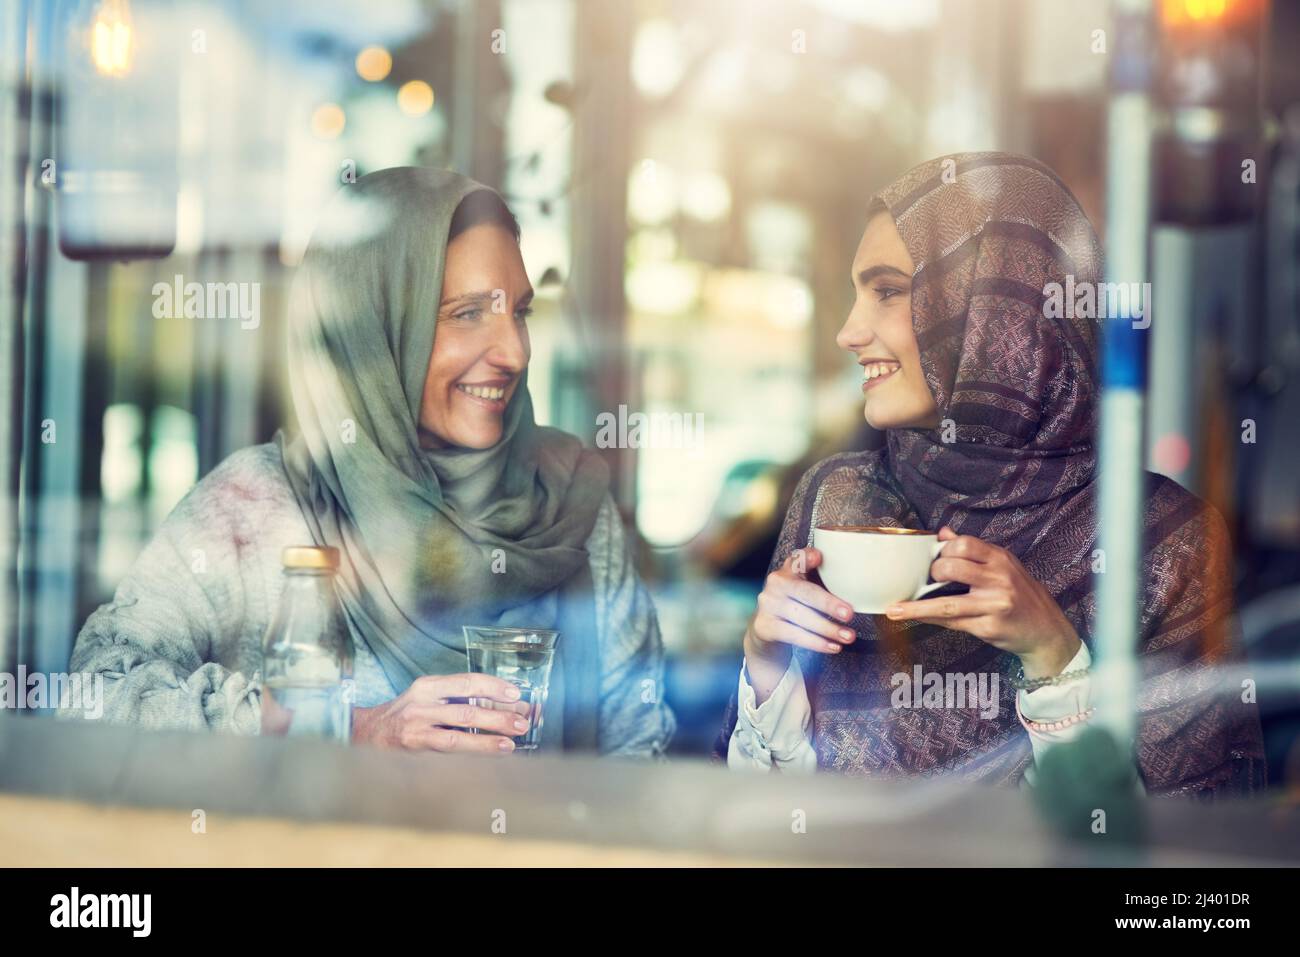 Coffee tastes better together. Shot of two women chatting over coffee in a cafe. Stock Photo